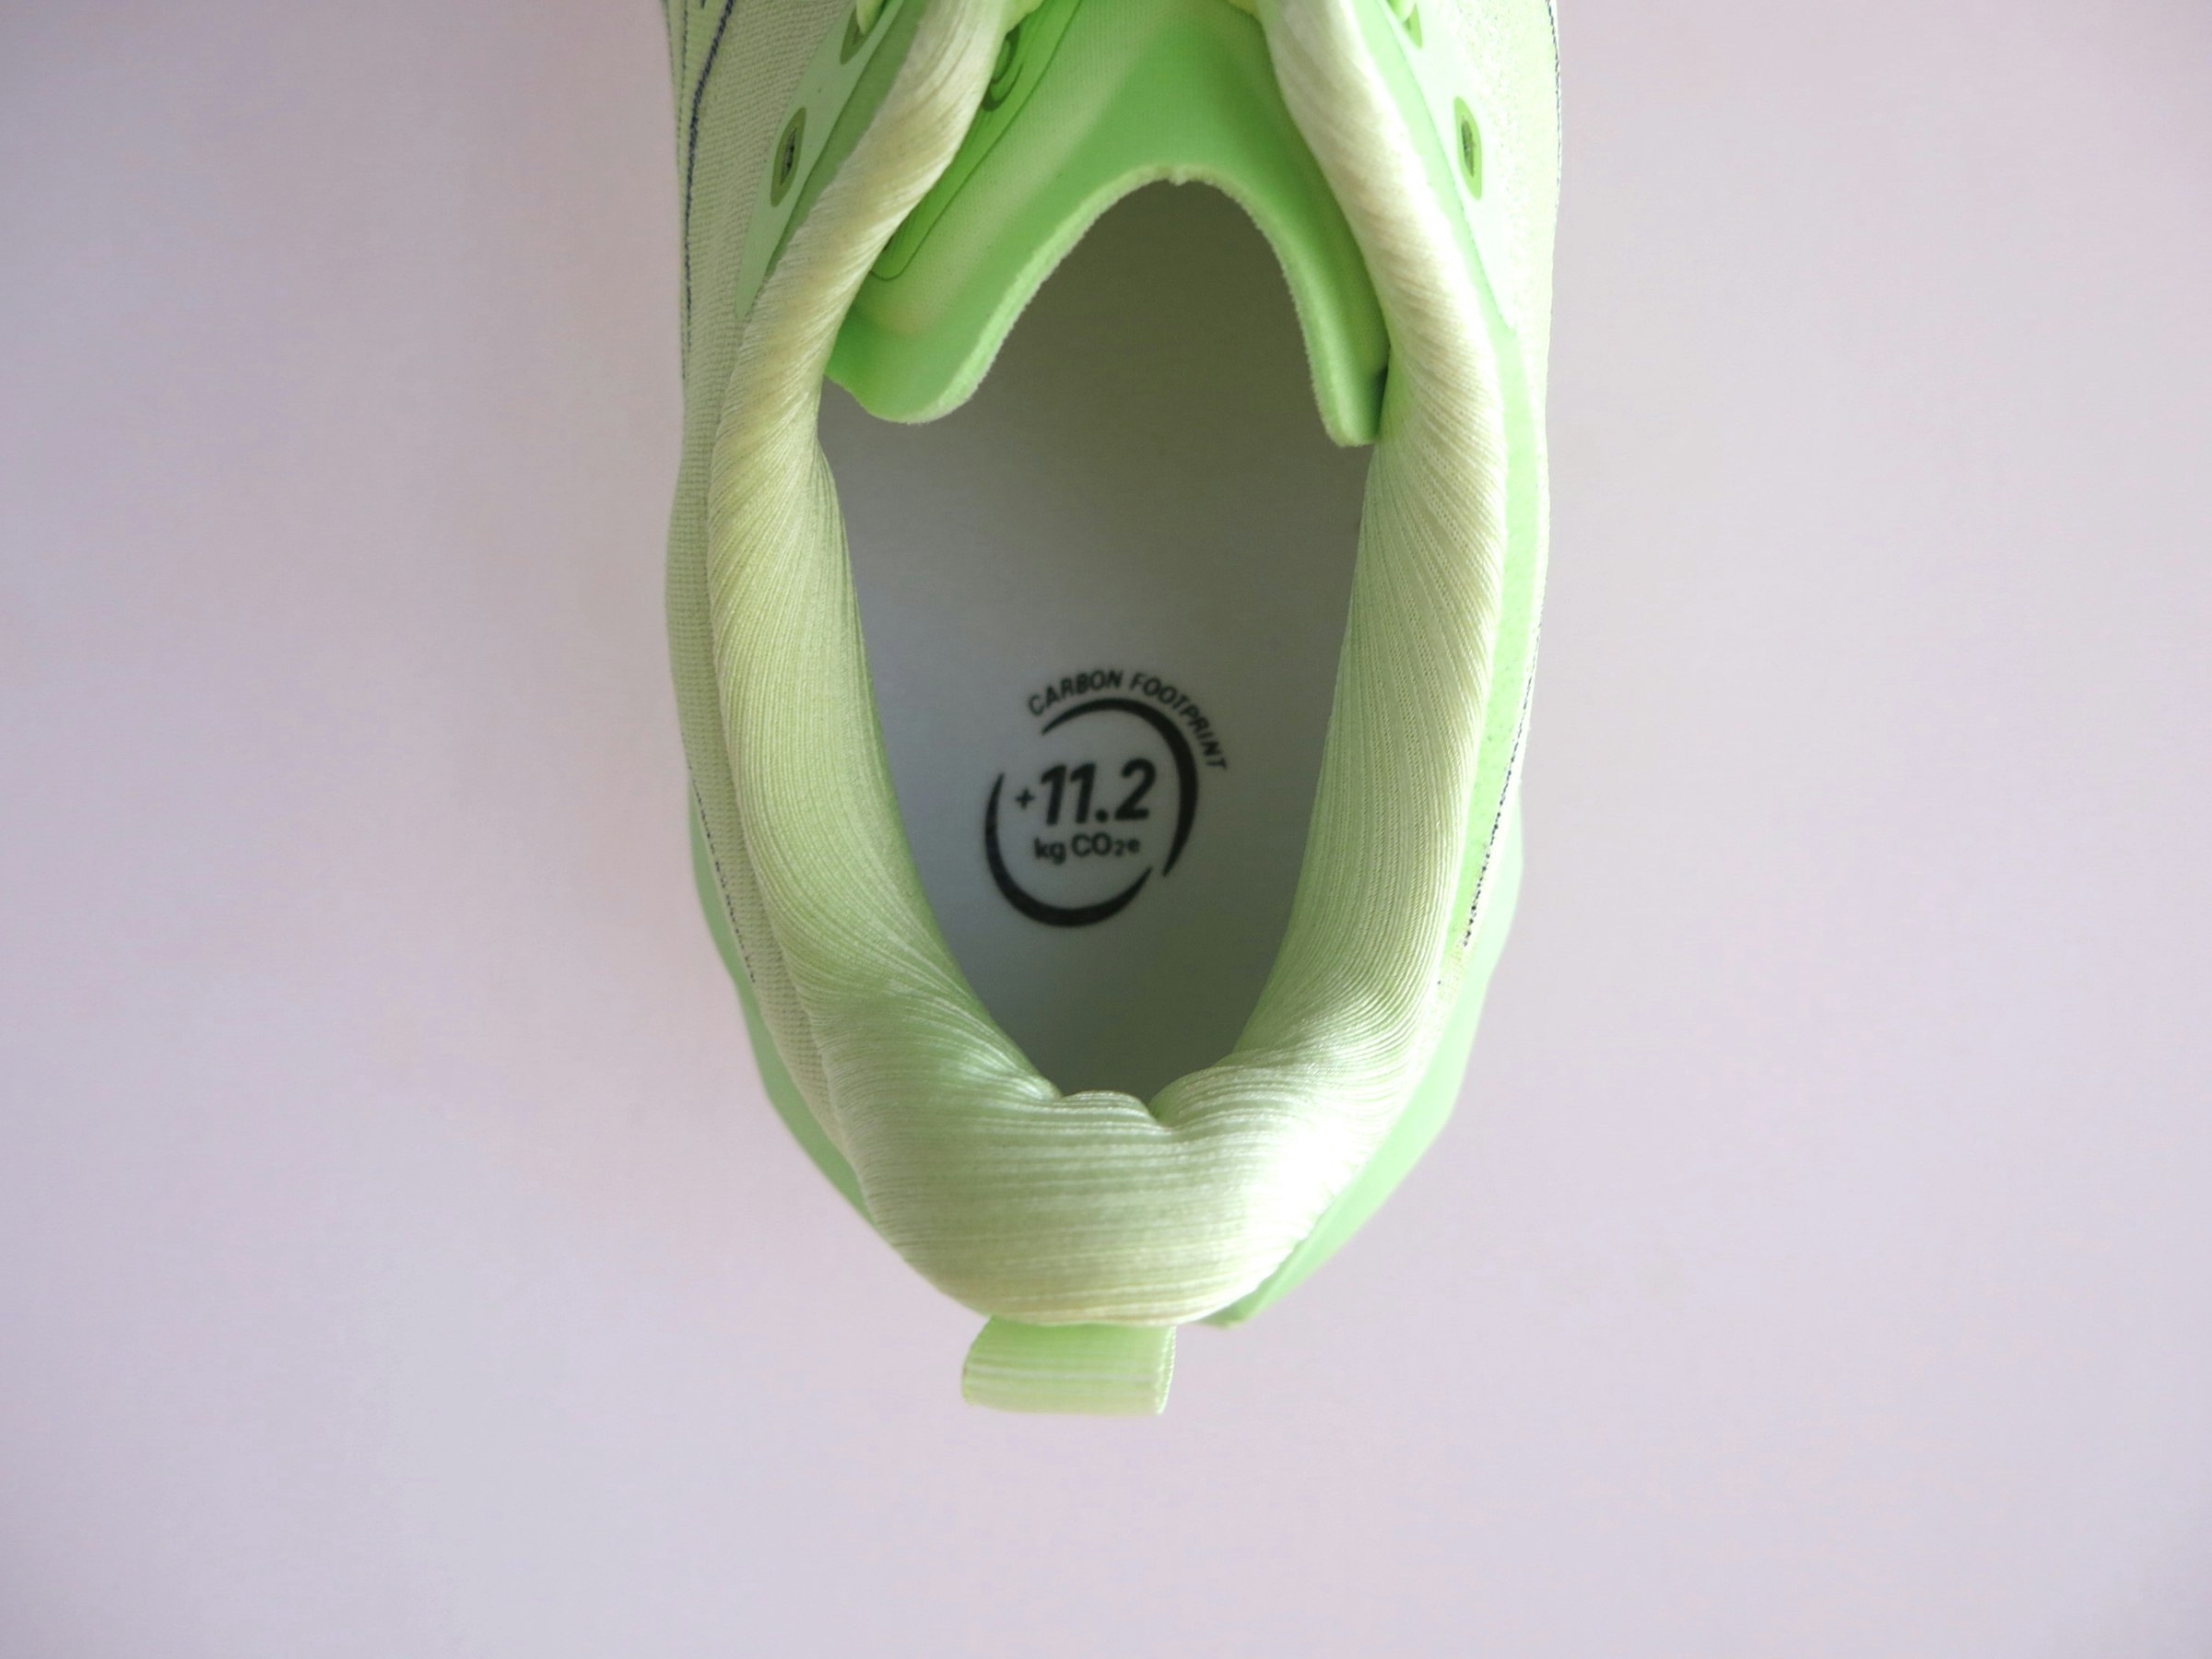 The carbon footprint is displayed on the insole. 11.2kgCO2e is 23% less than the industry average.